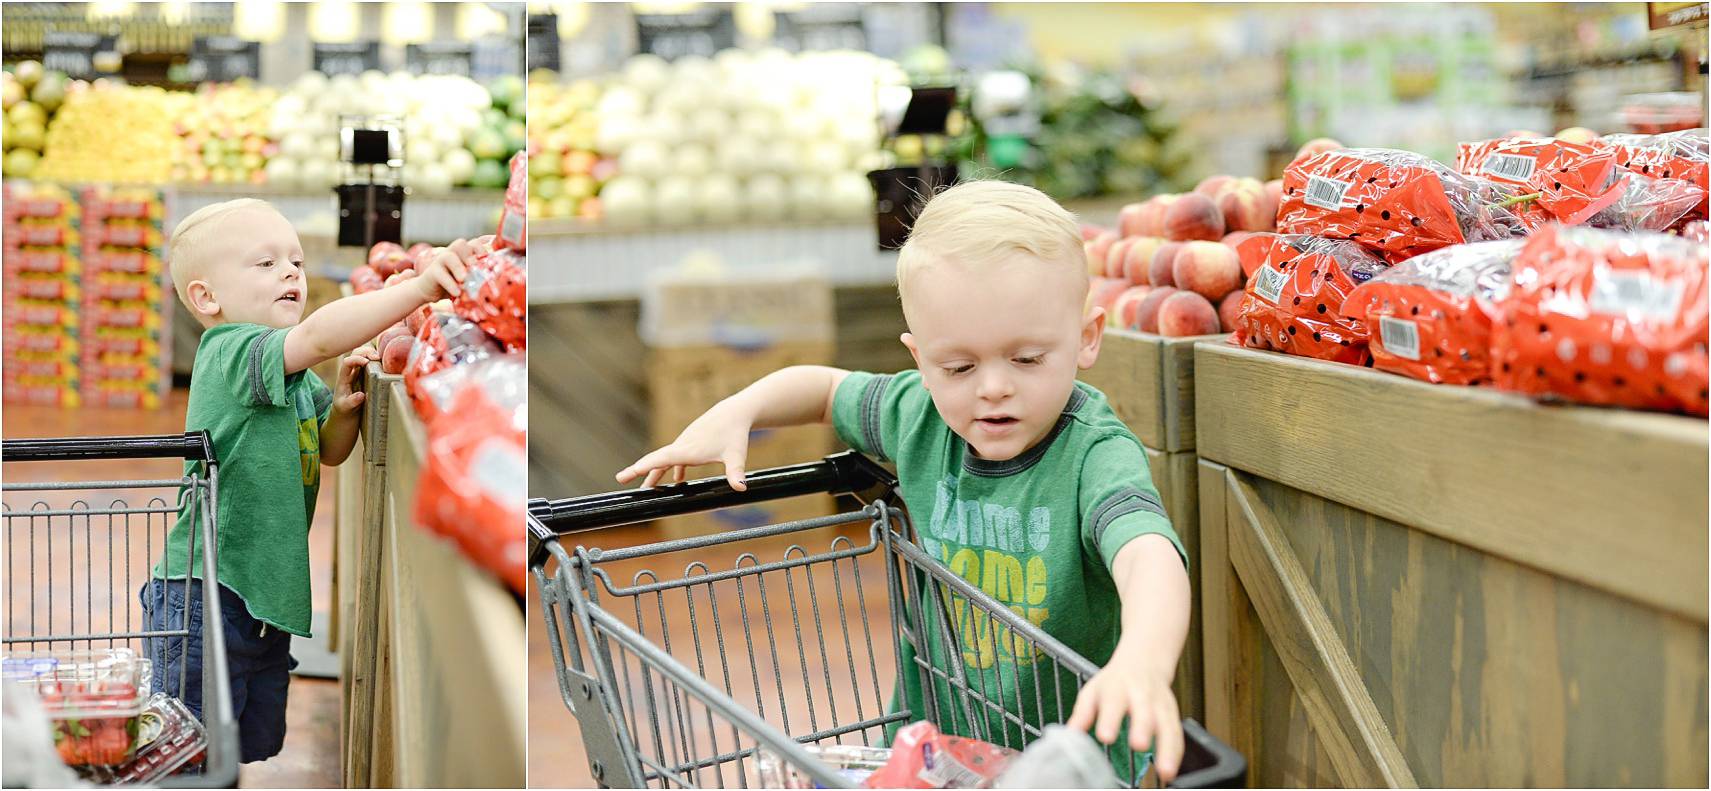 The Siners Grocery Shopping_0009